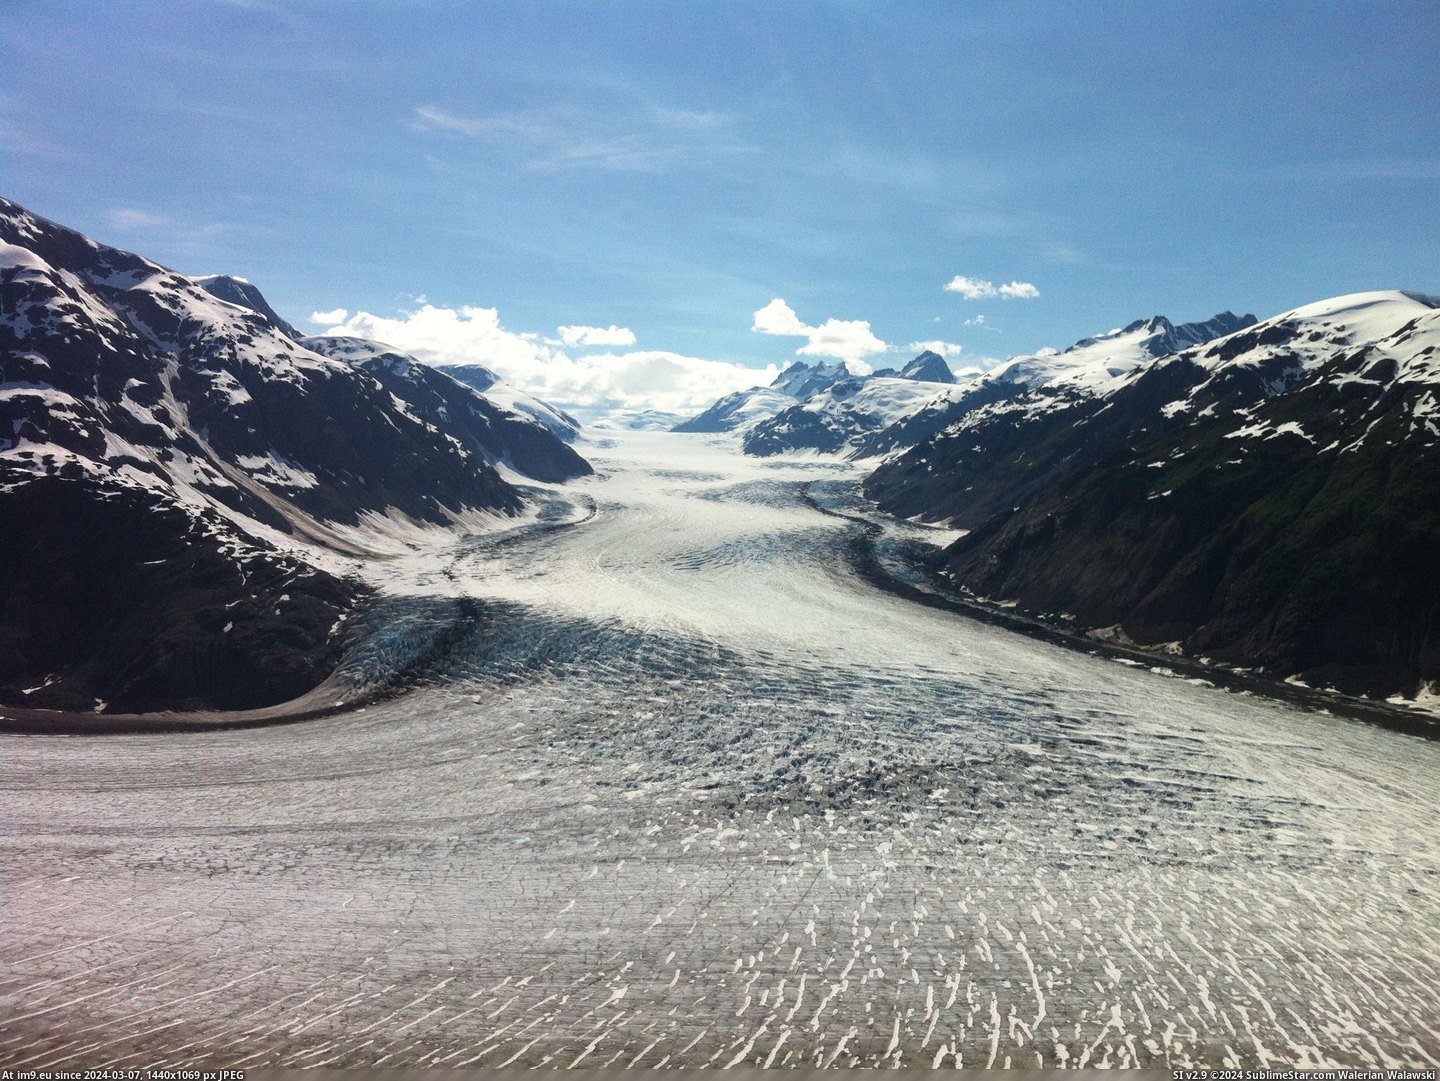 #Picture #Car #Mountain #Town #British #Glacier #Columbia #Drove [Earthporn] We drove an 80s Lincoln Town Car up winding mountain roads to get this picture. Salmon Glacier, British Columbia.  [ Pic. (Изображение из альбом My r/EARTHPORN favs))